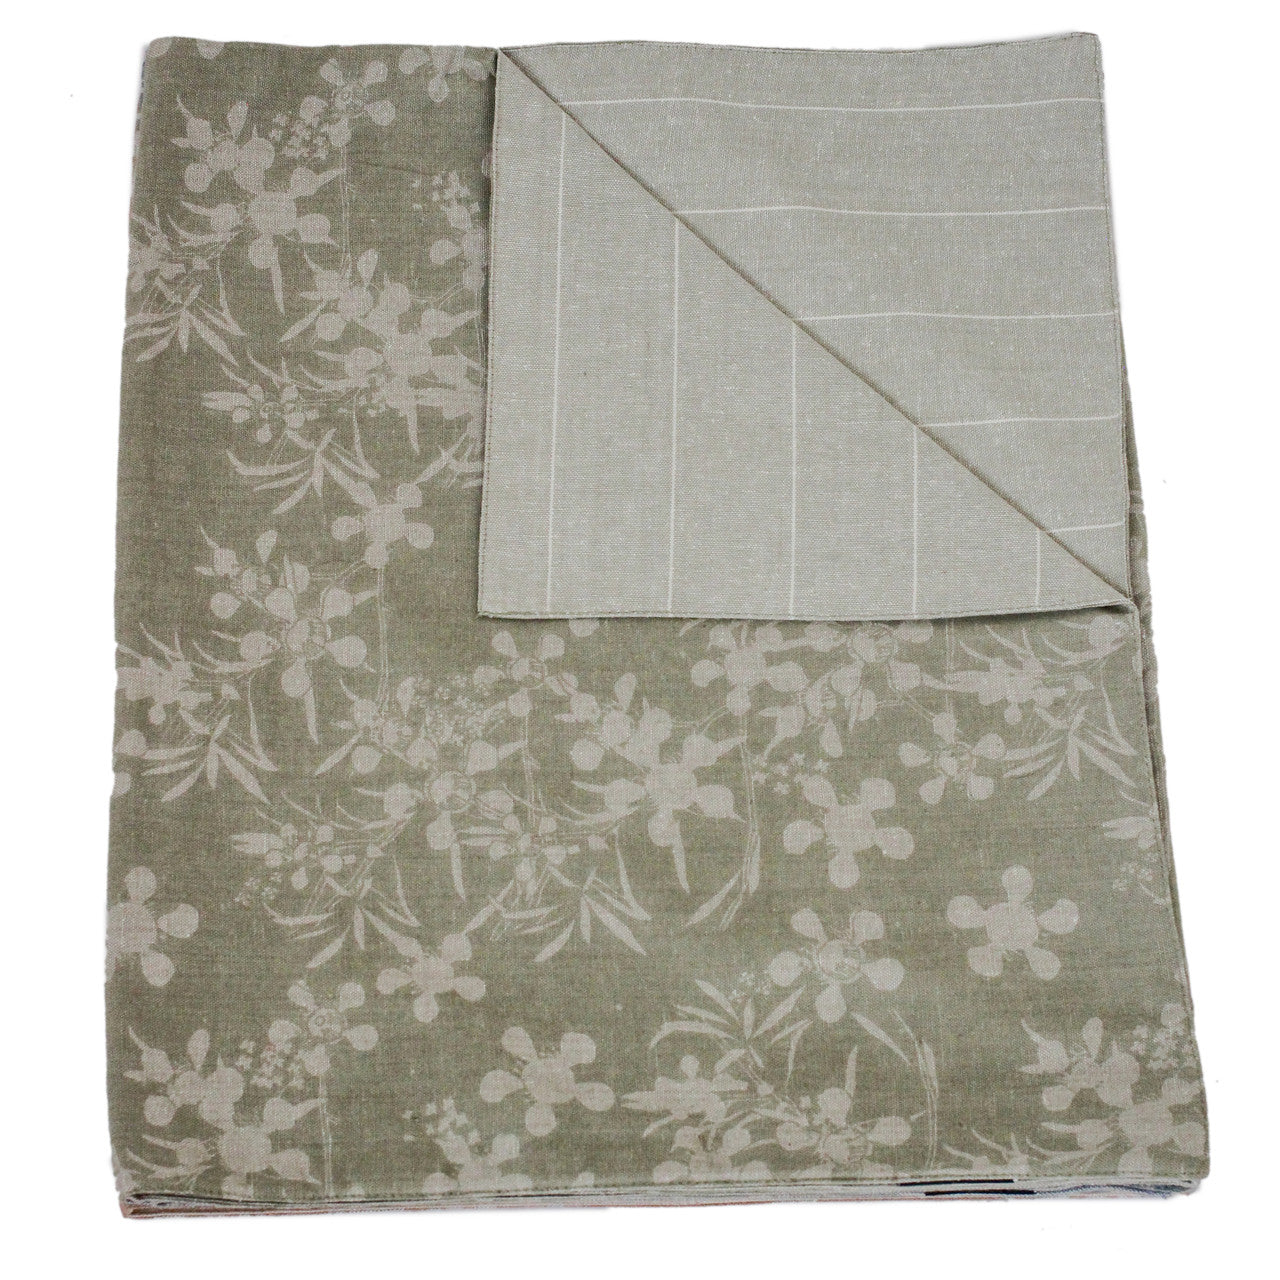 sage green runner with botanical design folded with one corner flapped over showing the reverse side.